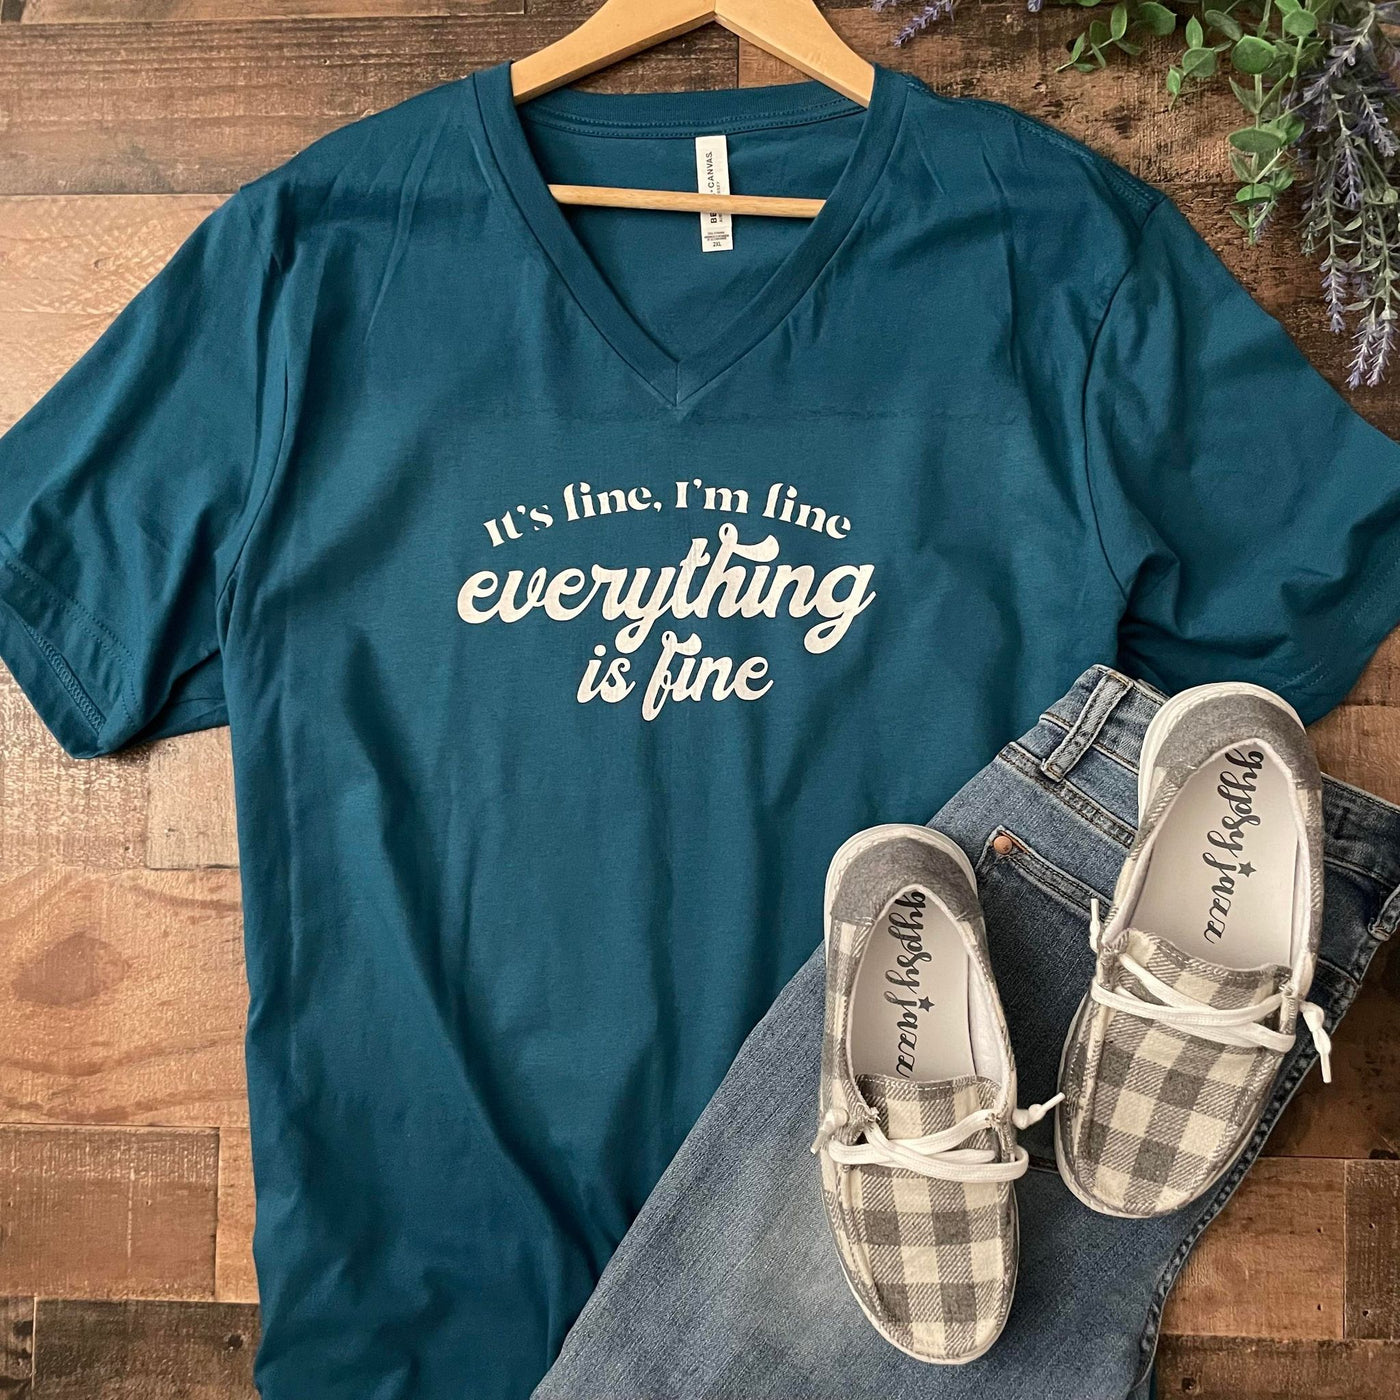 It's Fine, I'm Fine everything is Fine Graphic Tee Shirt